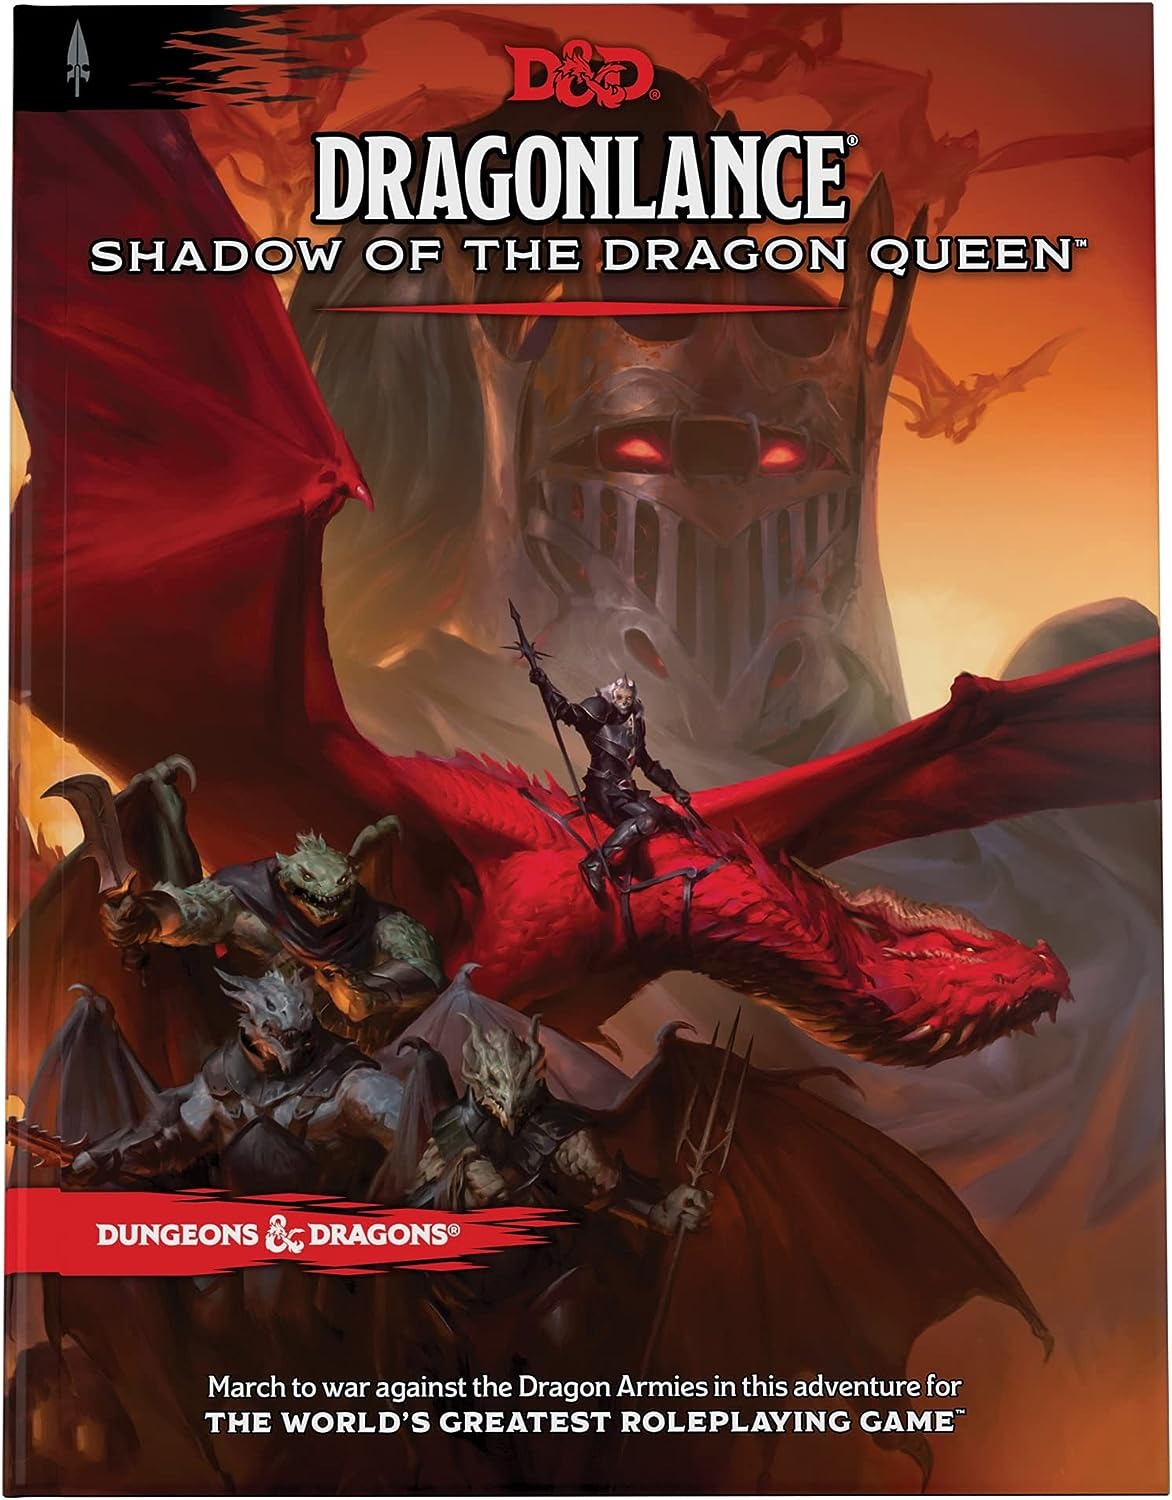 Dungeons & Dragons Rpg 5E: Dragonlance Shadow Dragon Queen Hardcover